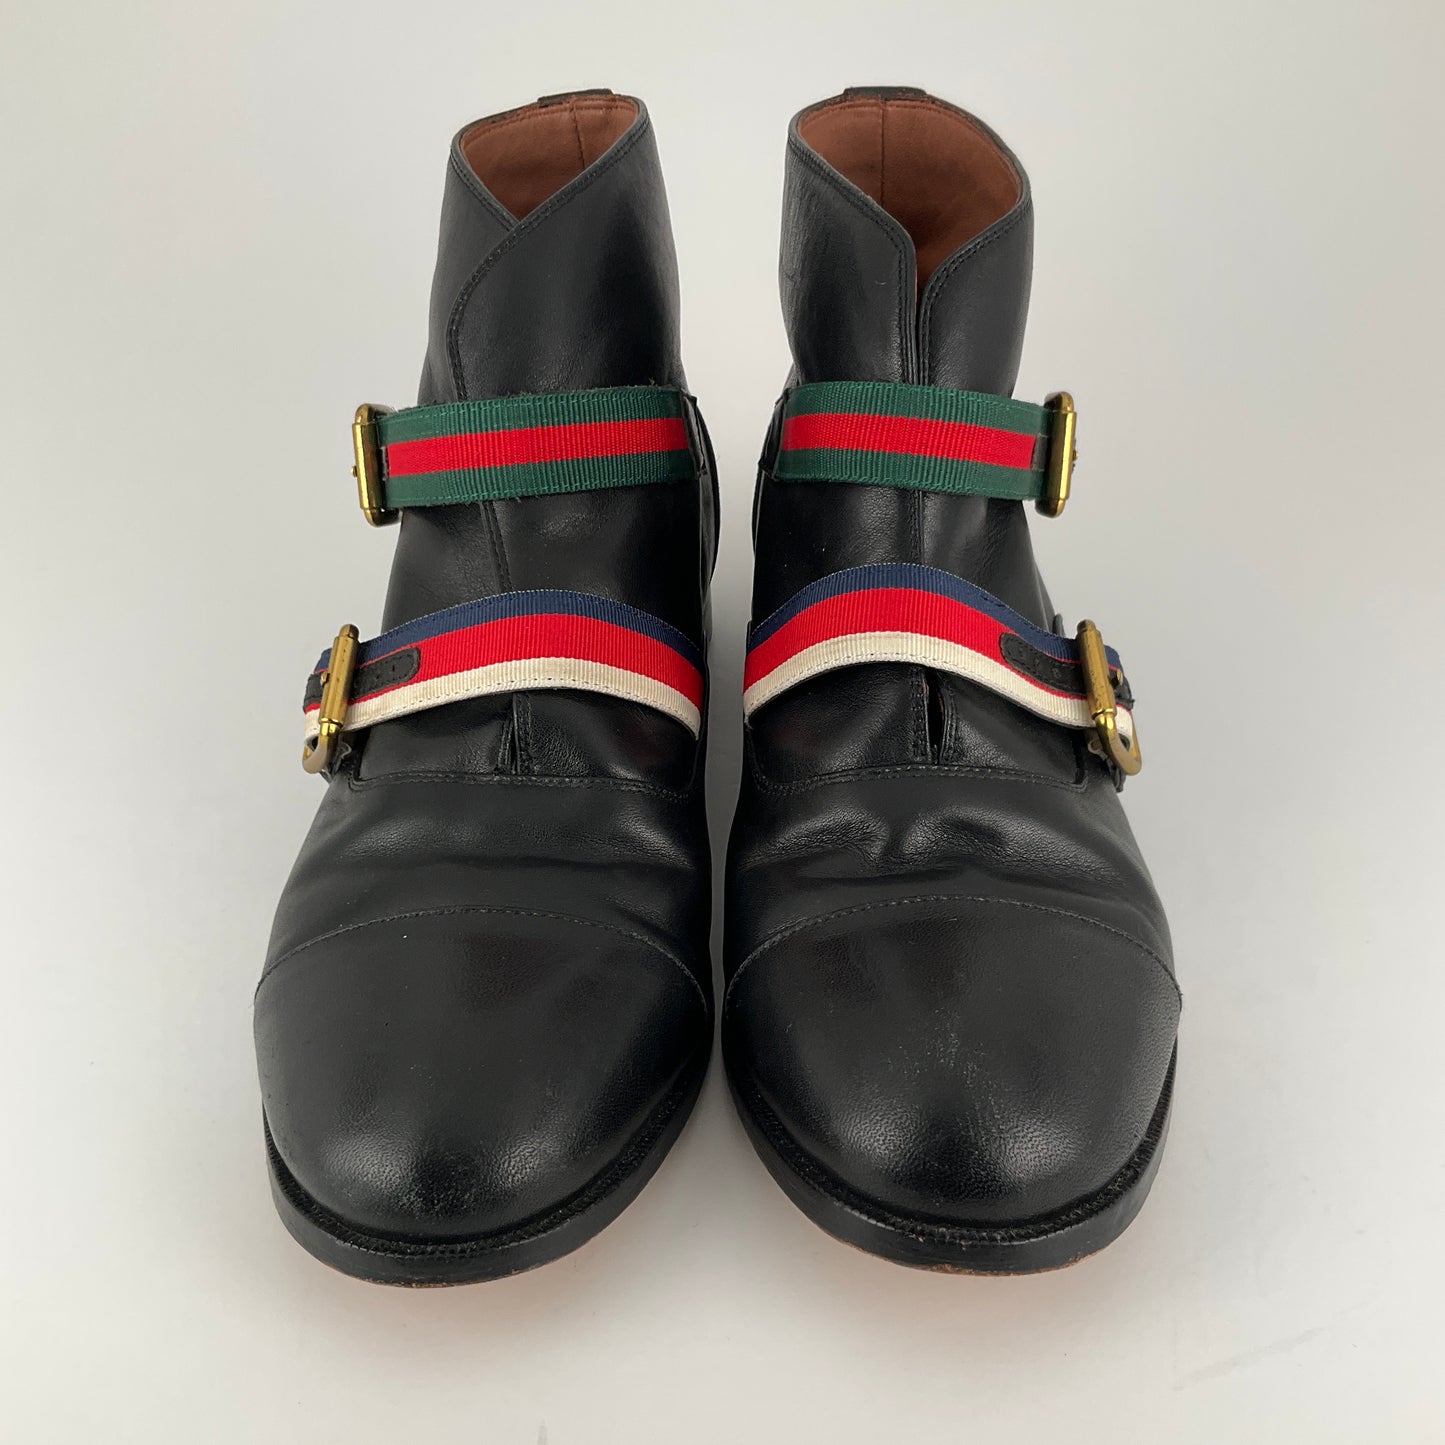 Gucci - Ankle Boot - Size 38